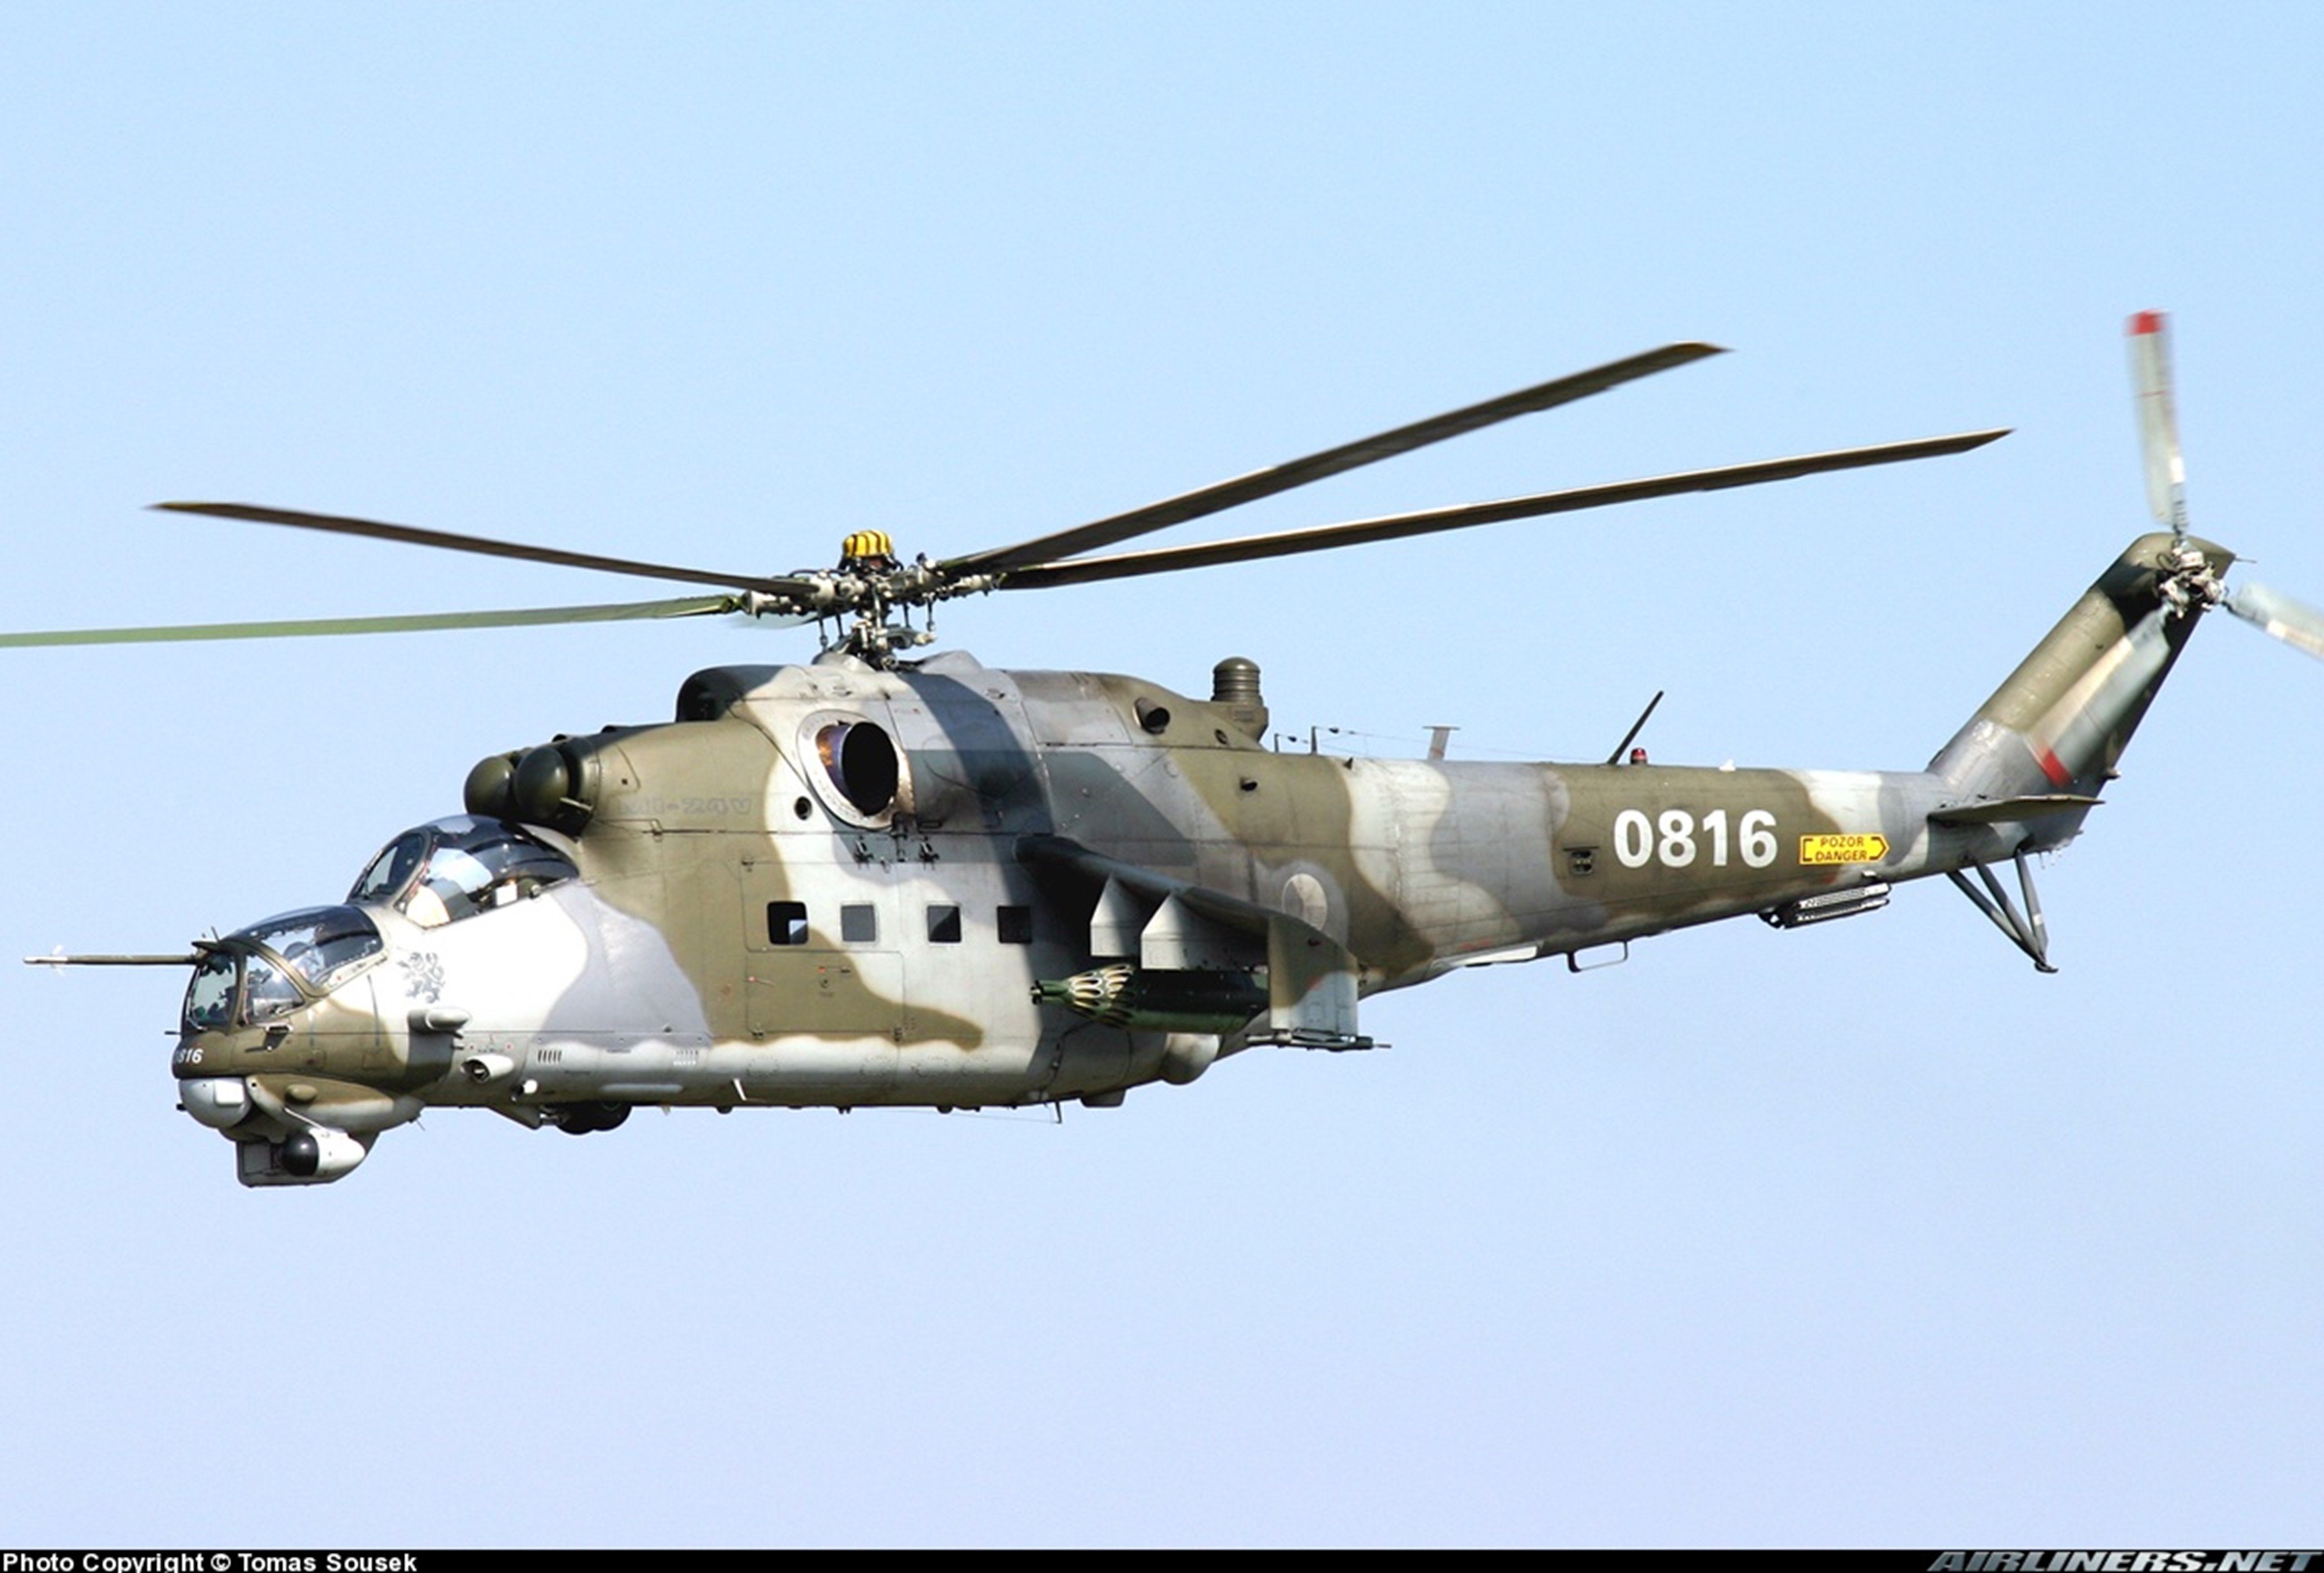 helicopter, Aircraft, Attack, Military, Army, Mil mi, Hungary Wallpaper